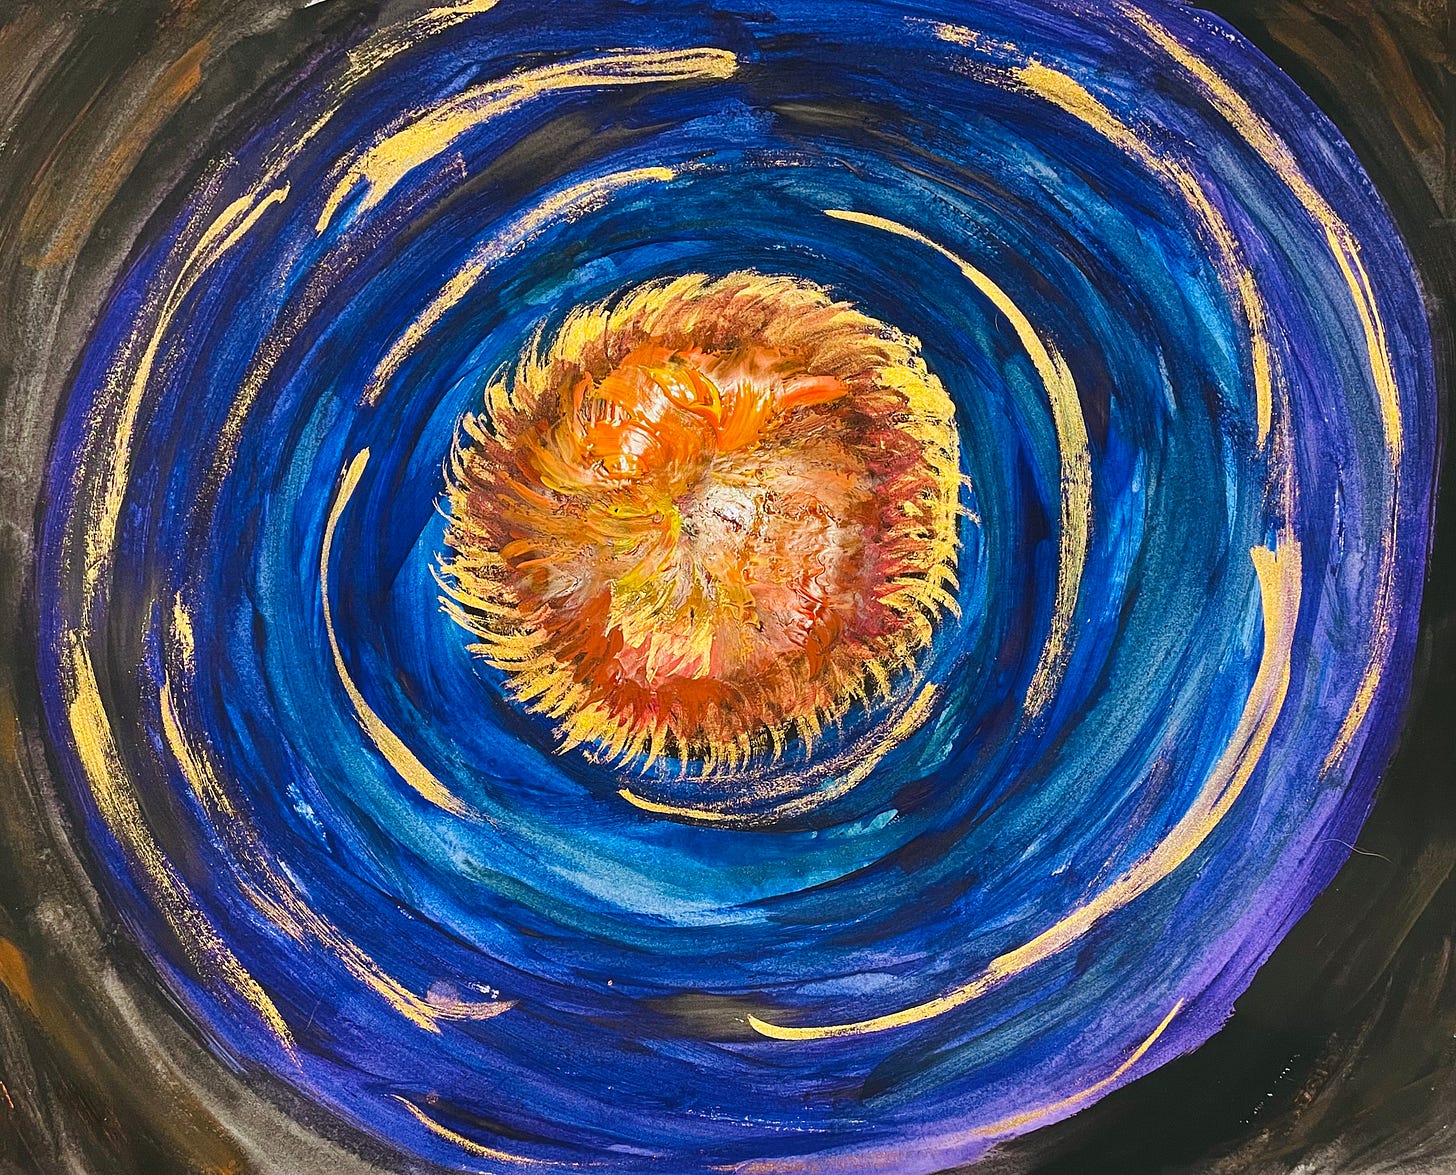 painting of a cosmic swirl of deep blue and purple with a flaming orange center and streaks of gold throughout